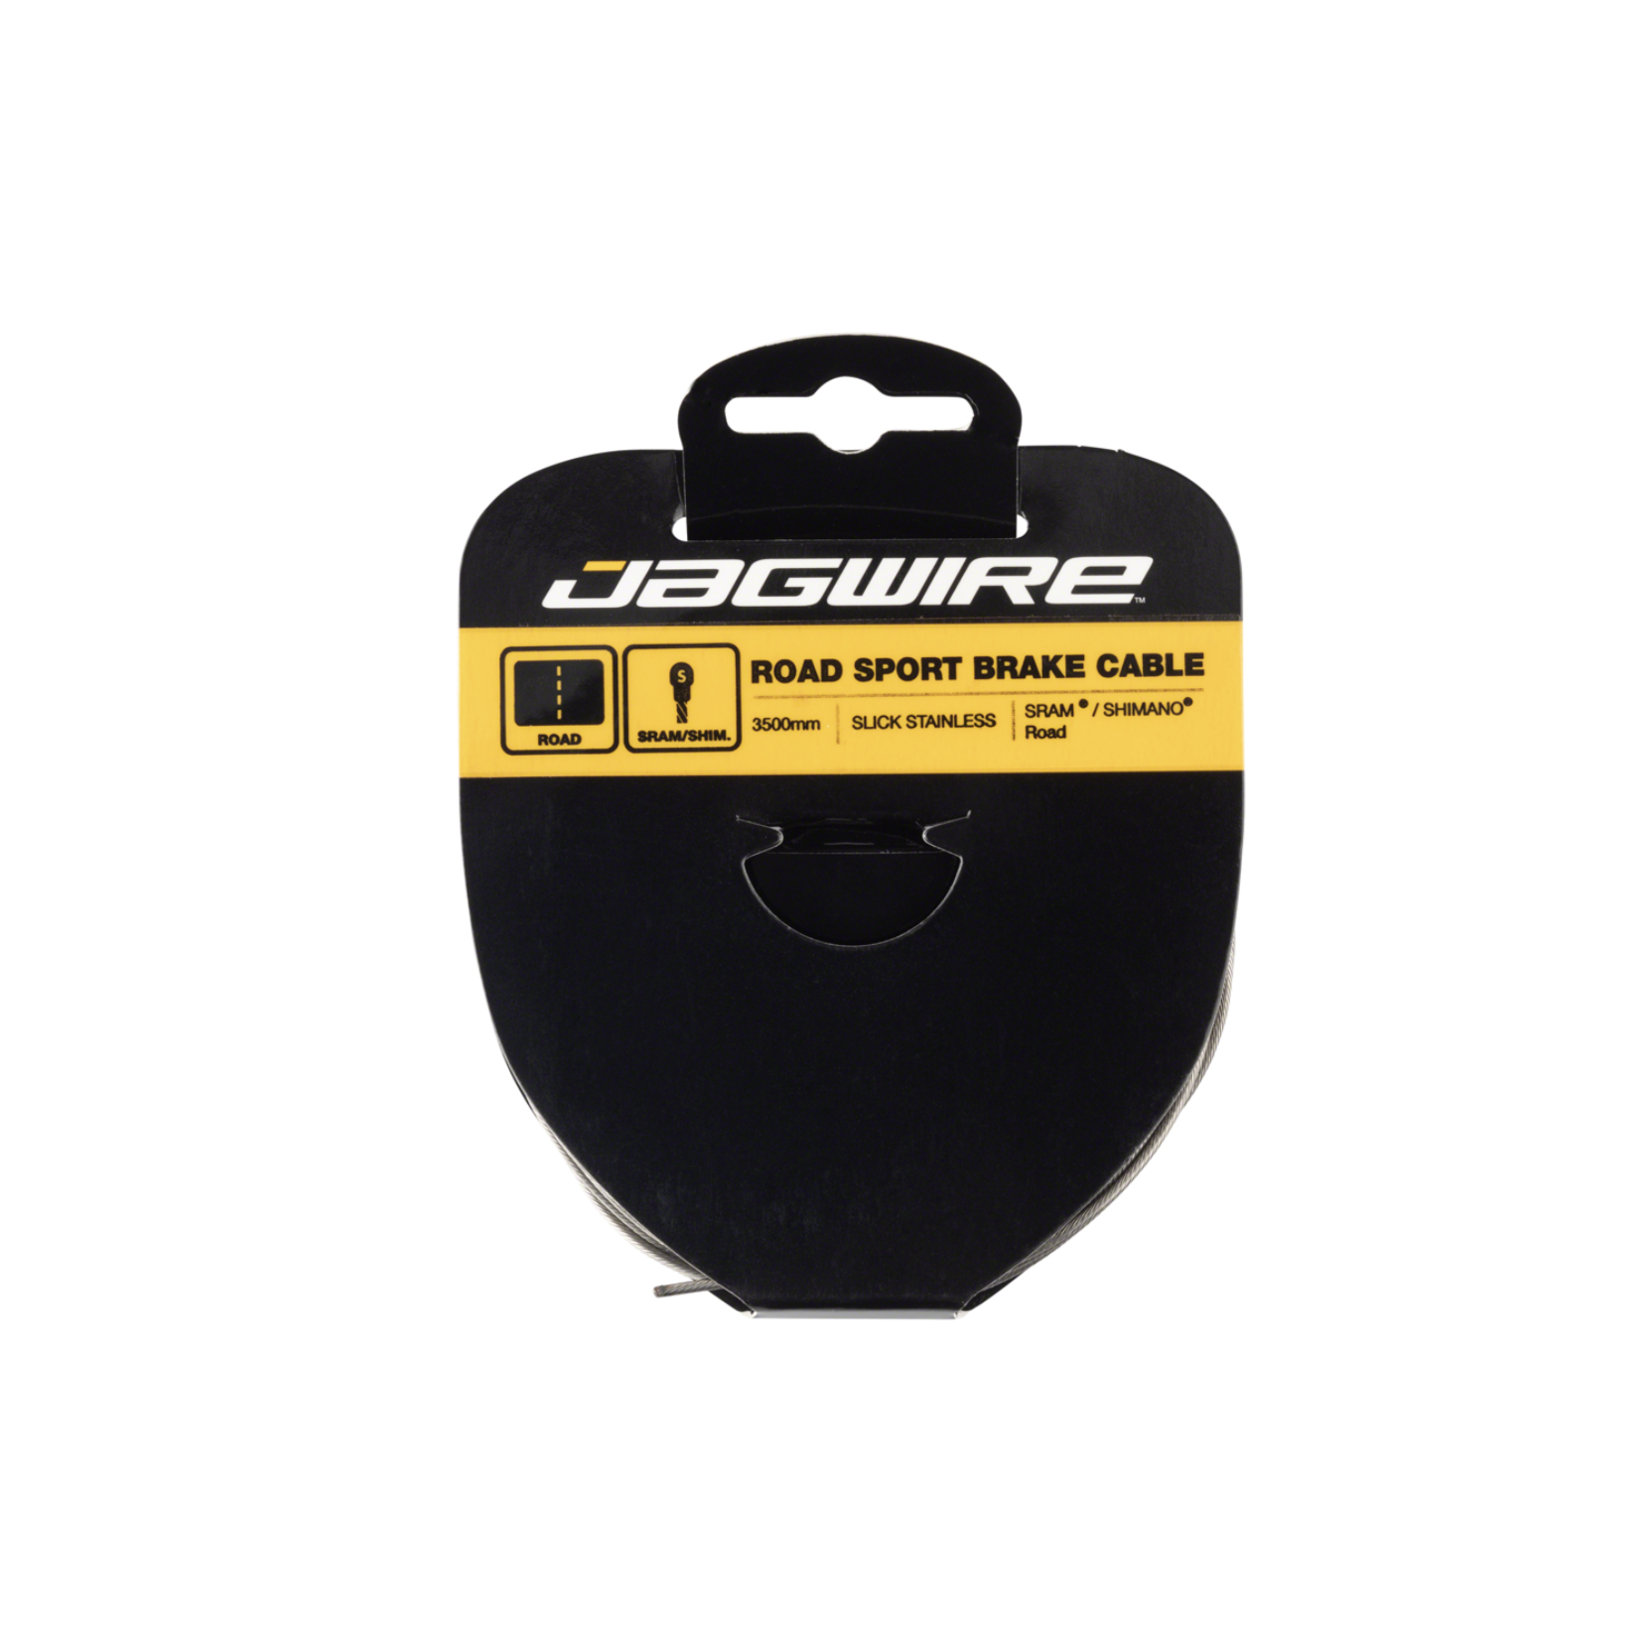 Jagwire CA4434 Jagwire Sport Brake Cable Slick Stainless 1.5x3500mm SRAM/Shimano Road Tandem